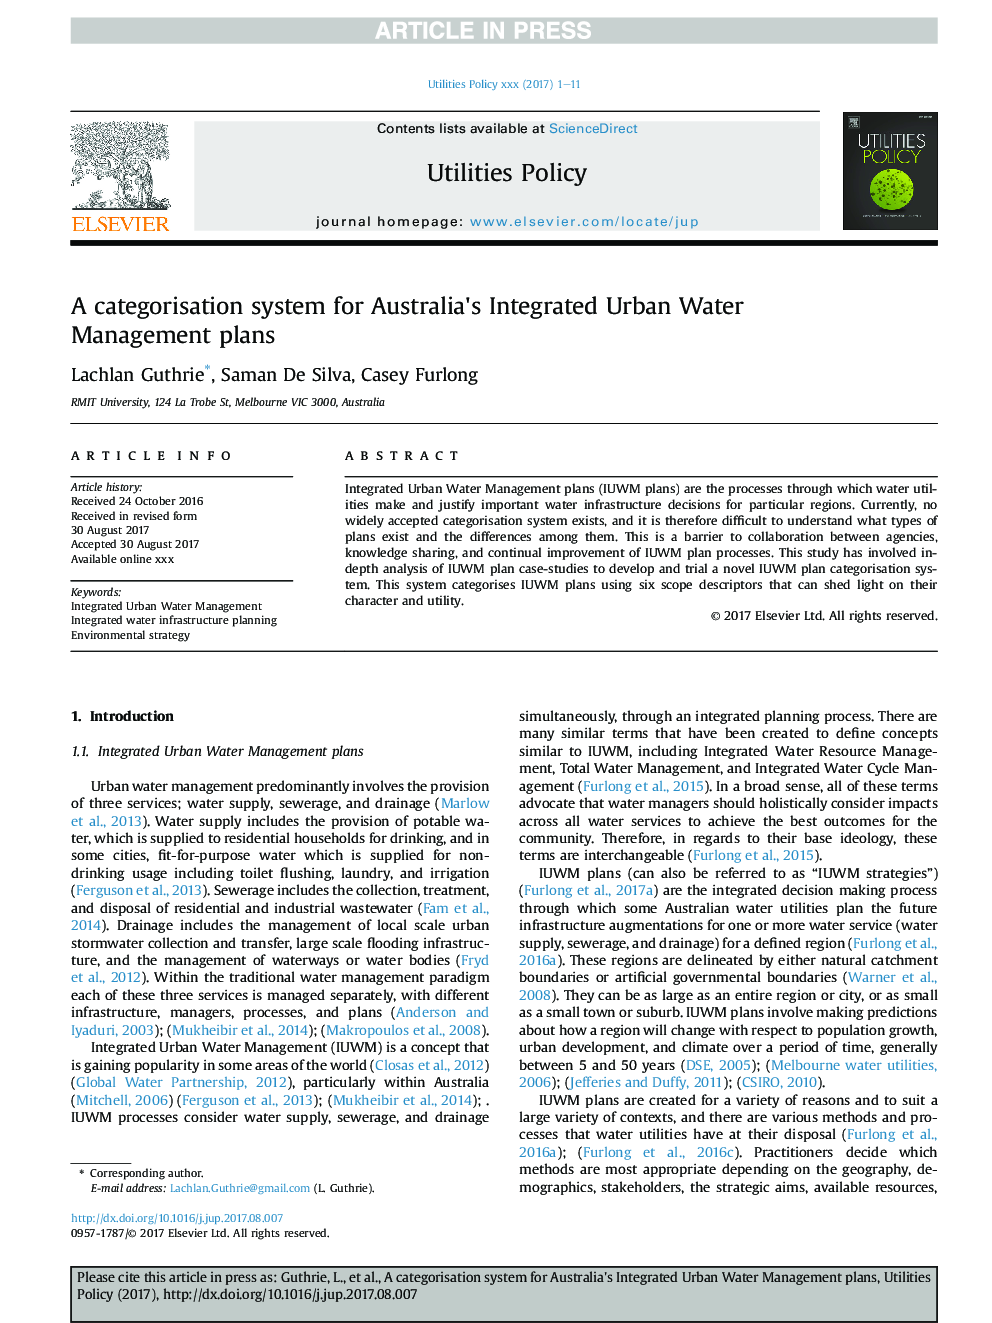 A categorisation system for Australia's Integrated Urban Water Management plans